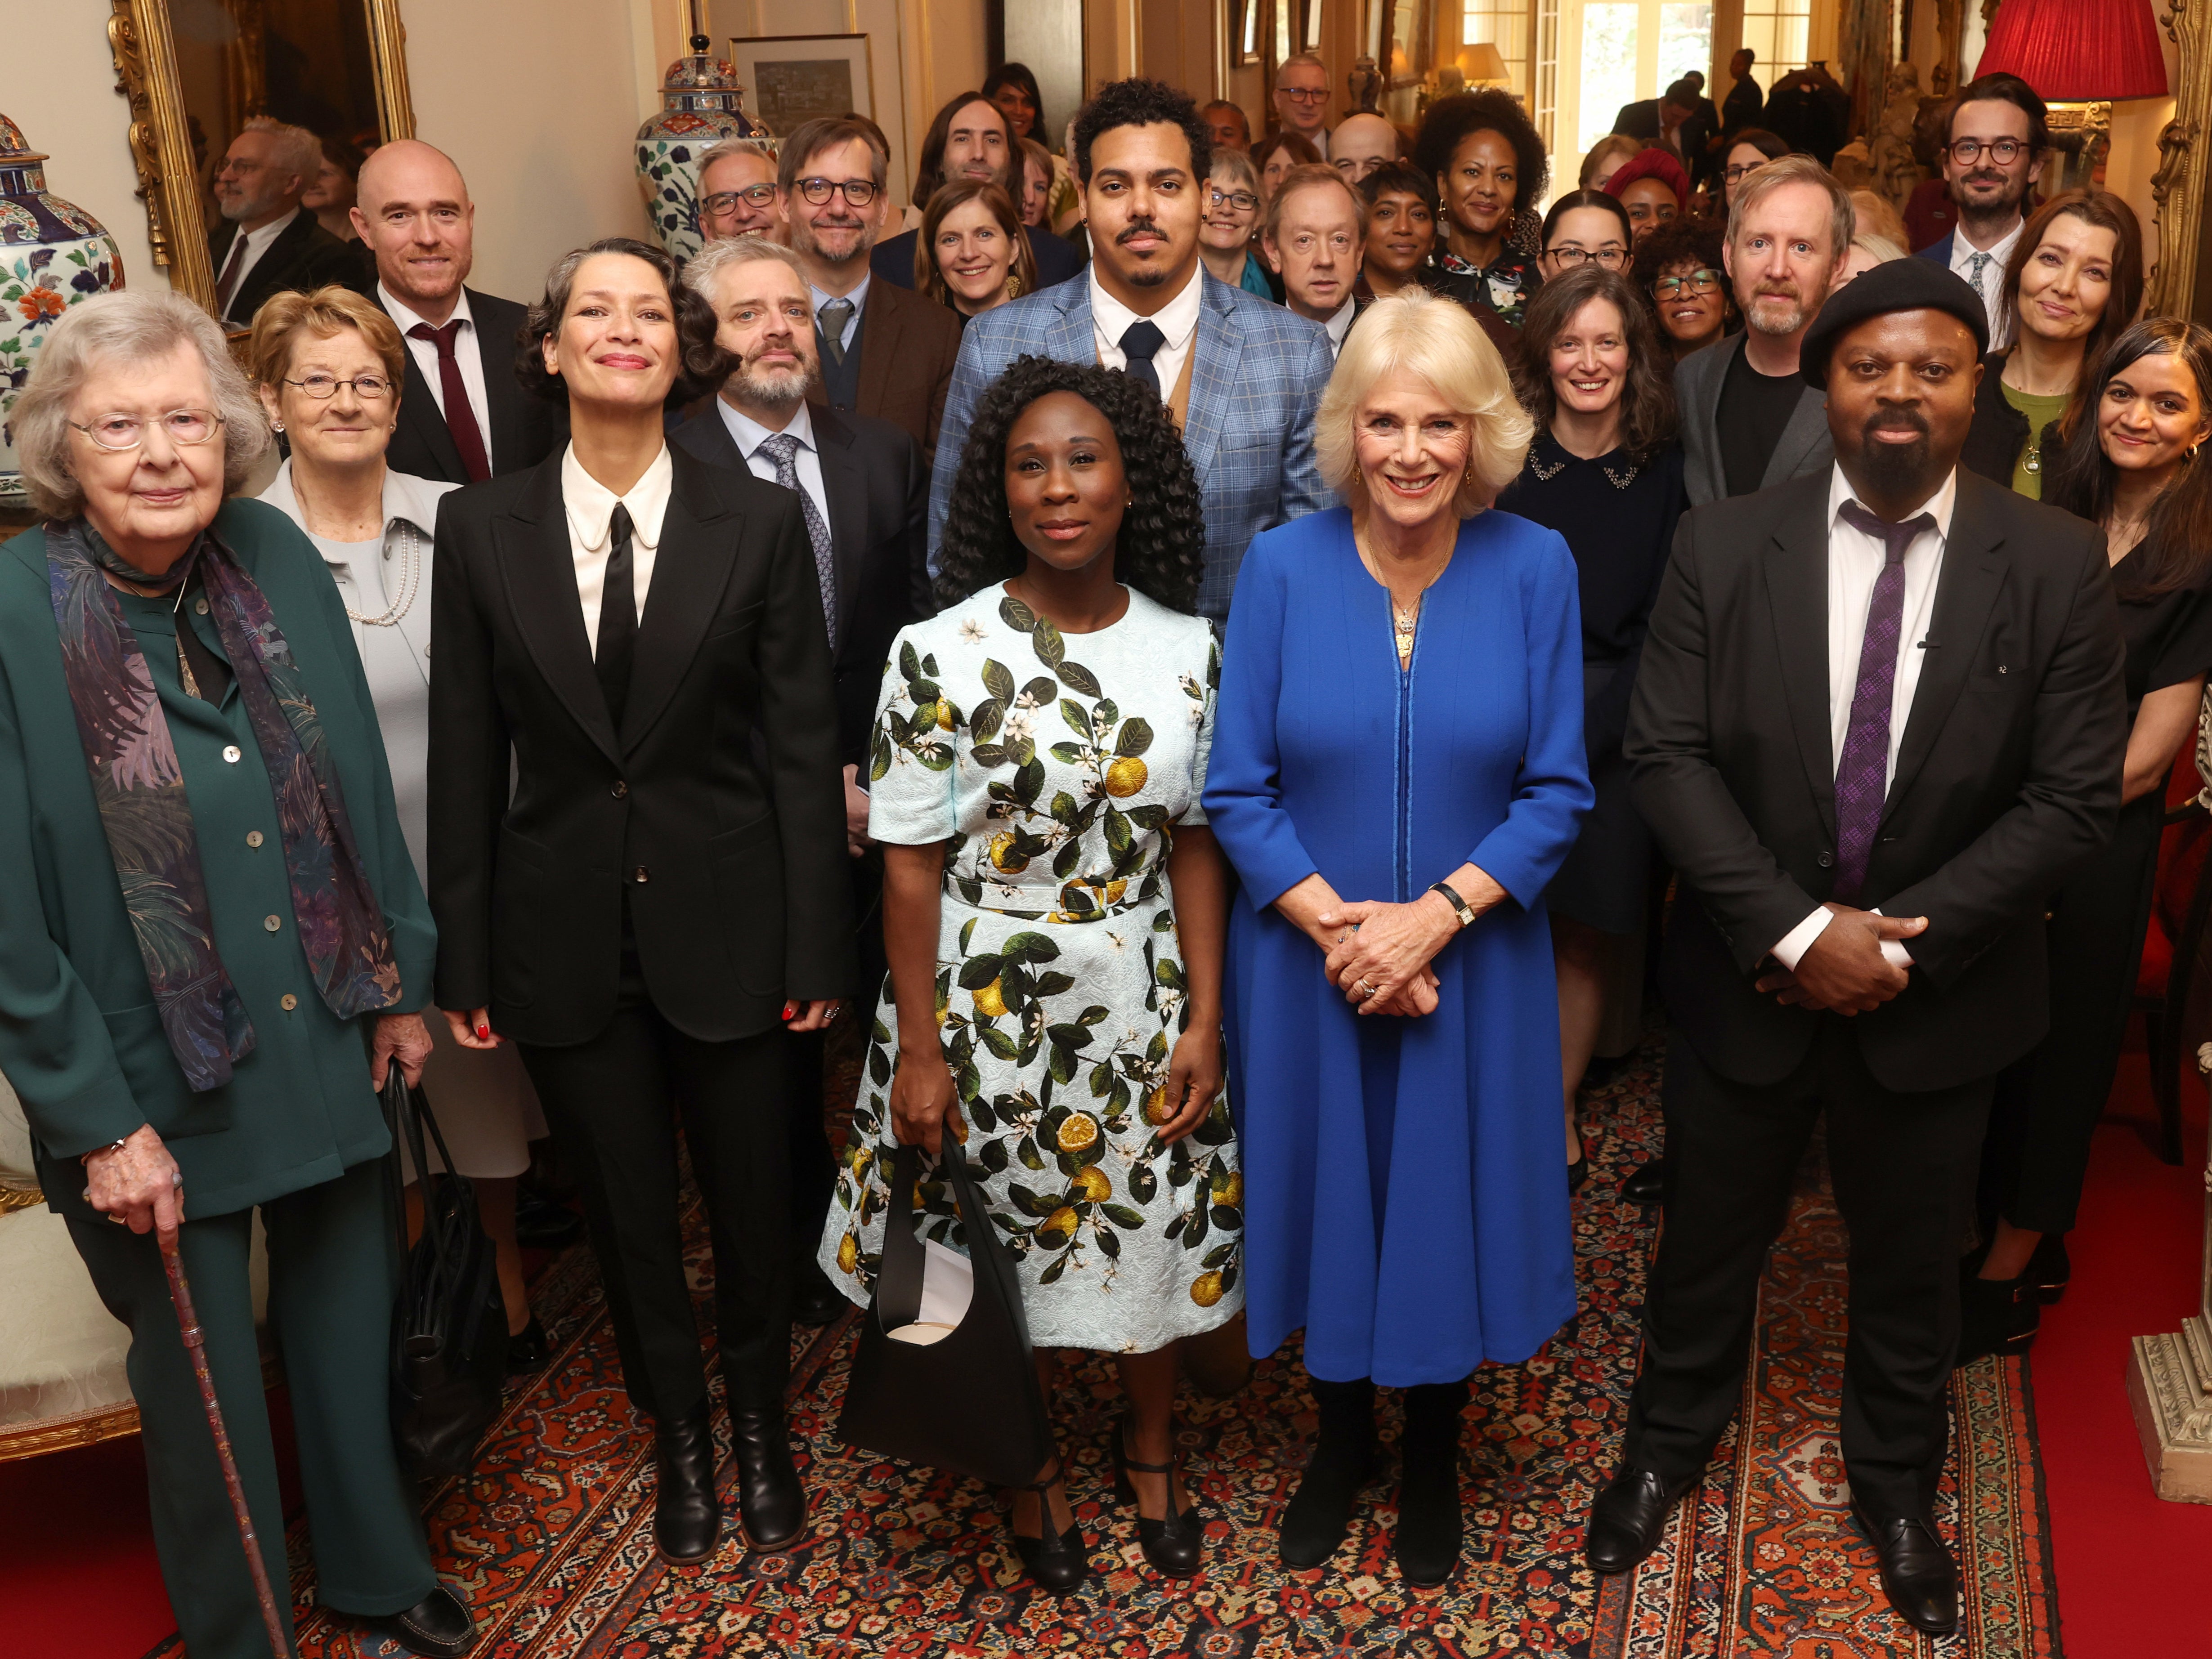 camilla, booker prize, salman rushdie, clarence house, hilary mantel, margaret atwood, camilla ‘makes reading sexy’, says ben okri as queen hosts booker prize event